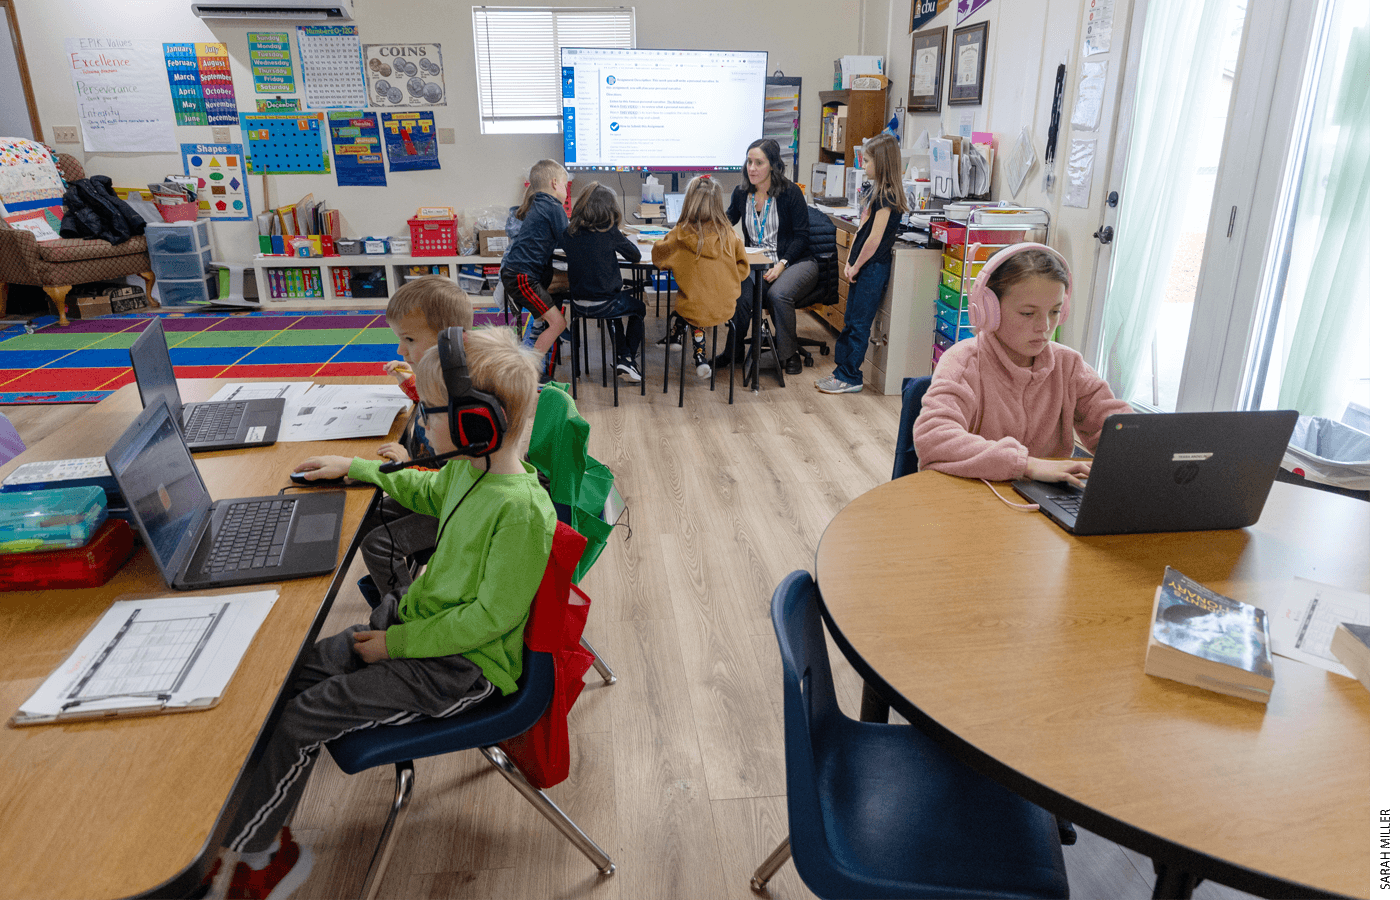 A typical school day at a Gem Prep Learning Society sees some students engaged in online lessons on laptops while others receive instruction from a teacher in a small group, all within the same classroom.